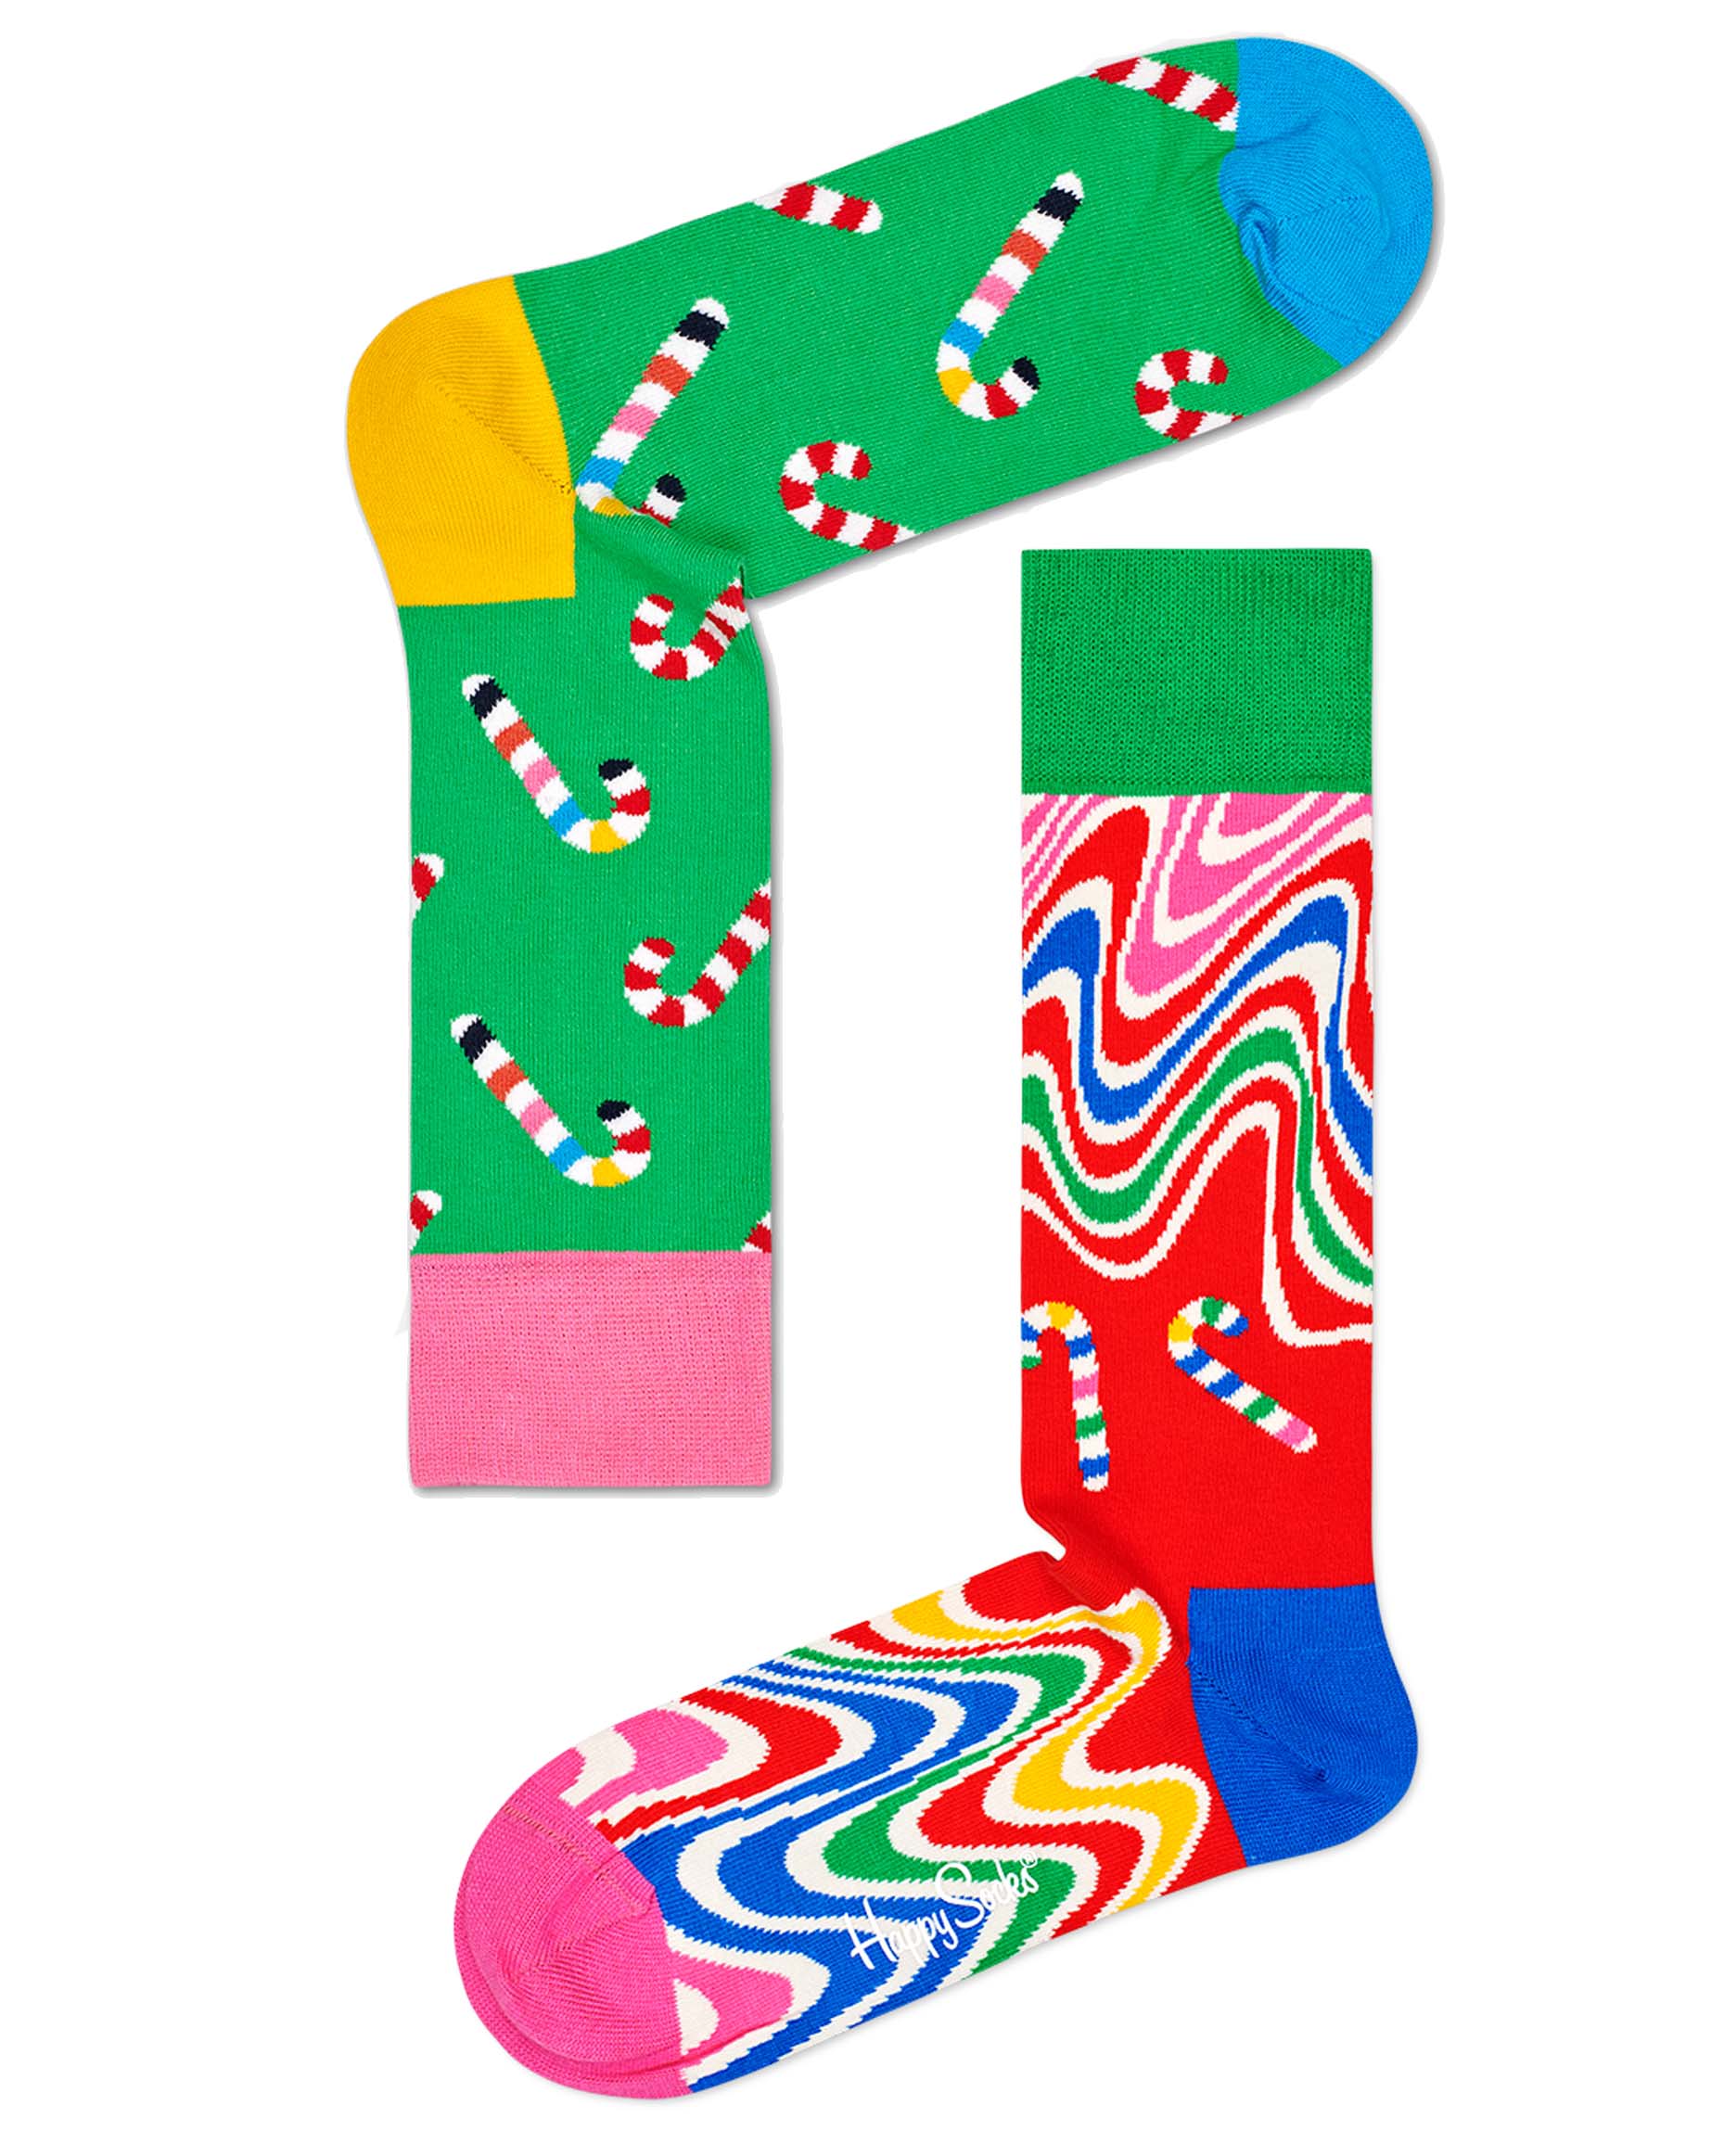 Happy Socks XCCA02-0100 Psychedelic Candy Cane Socks Gift Box - Christmas Cracker gift box with two pairs of socks. One pair is red with multicoloured wavy lines pattern and candy canes and the other is green with multicoloured candy cane pattern, pink cuff, yellow heel and blue toe. Available in men and women size.